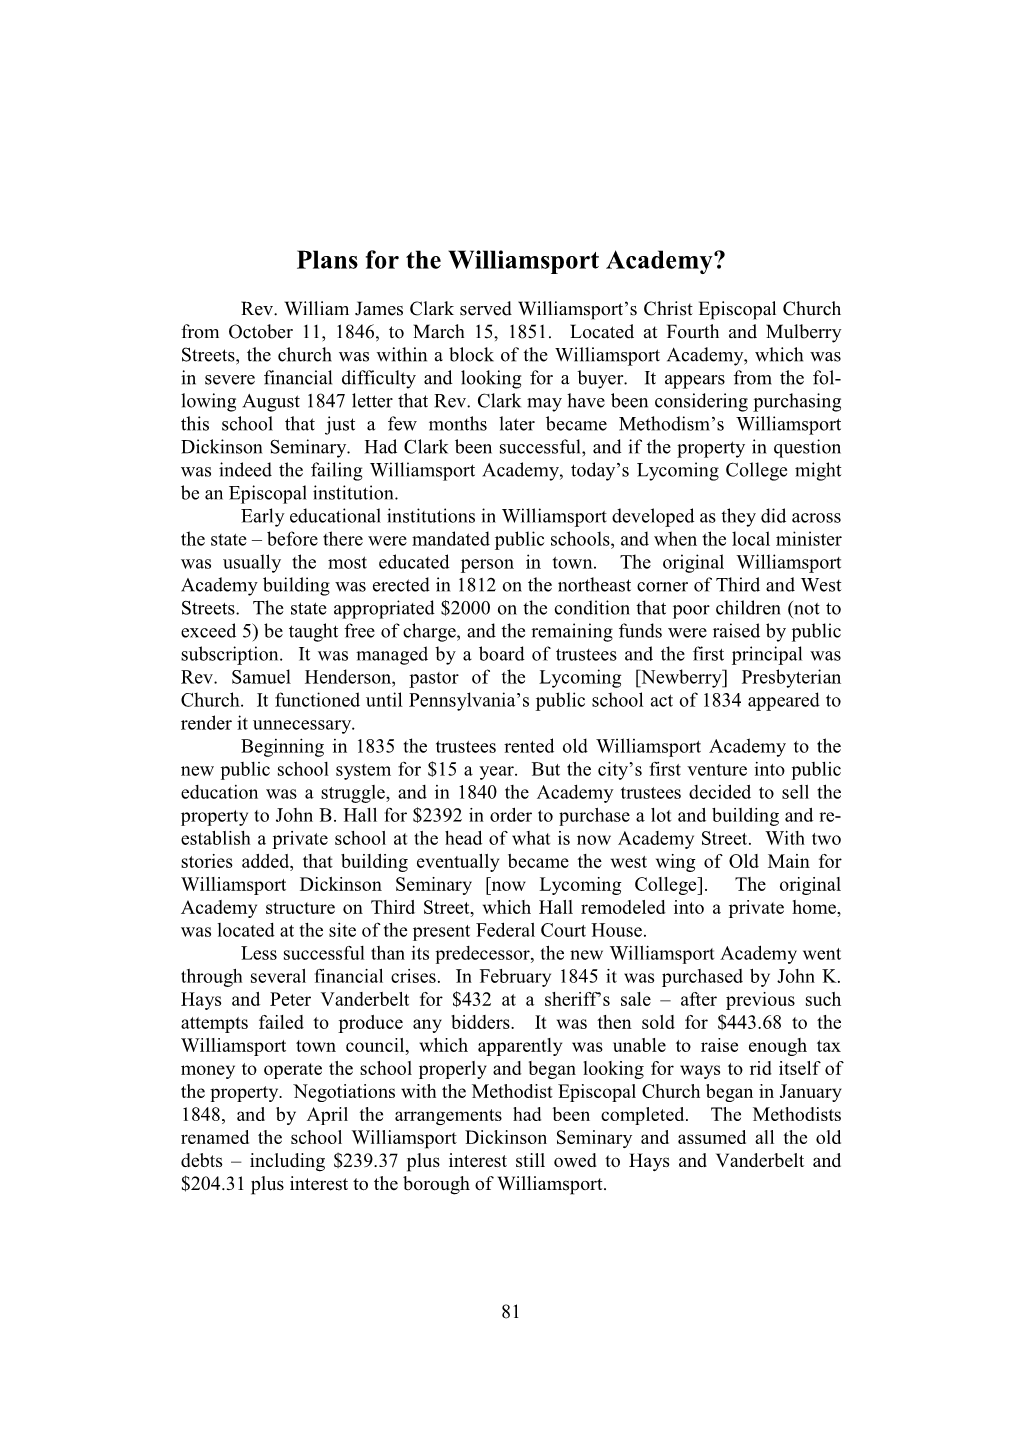 Plans for the Williamsport Academy?